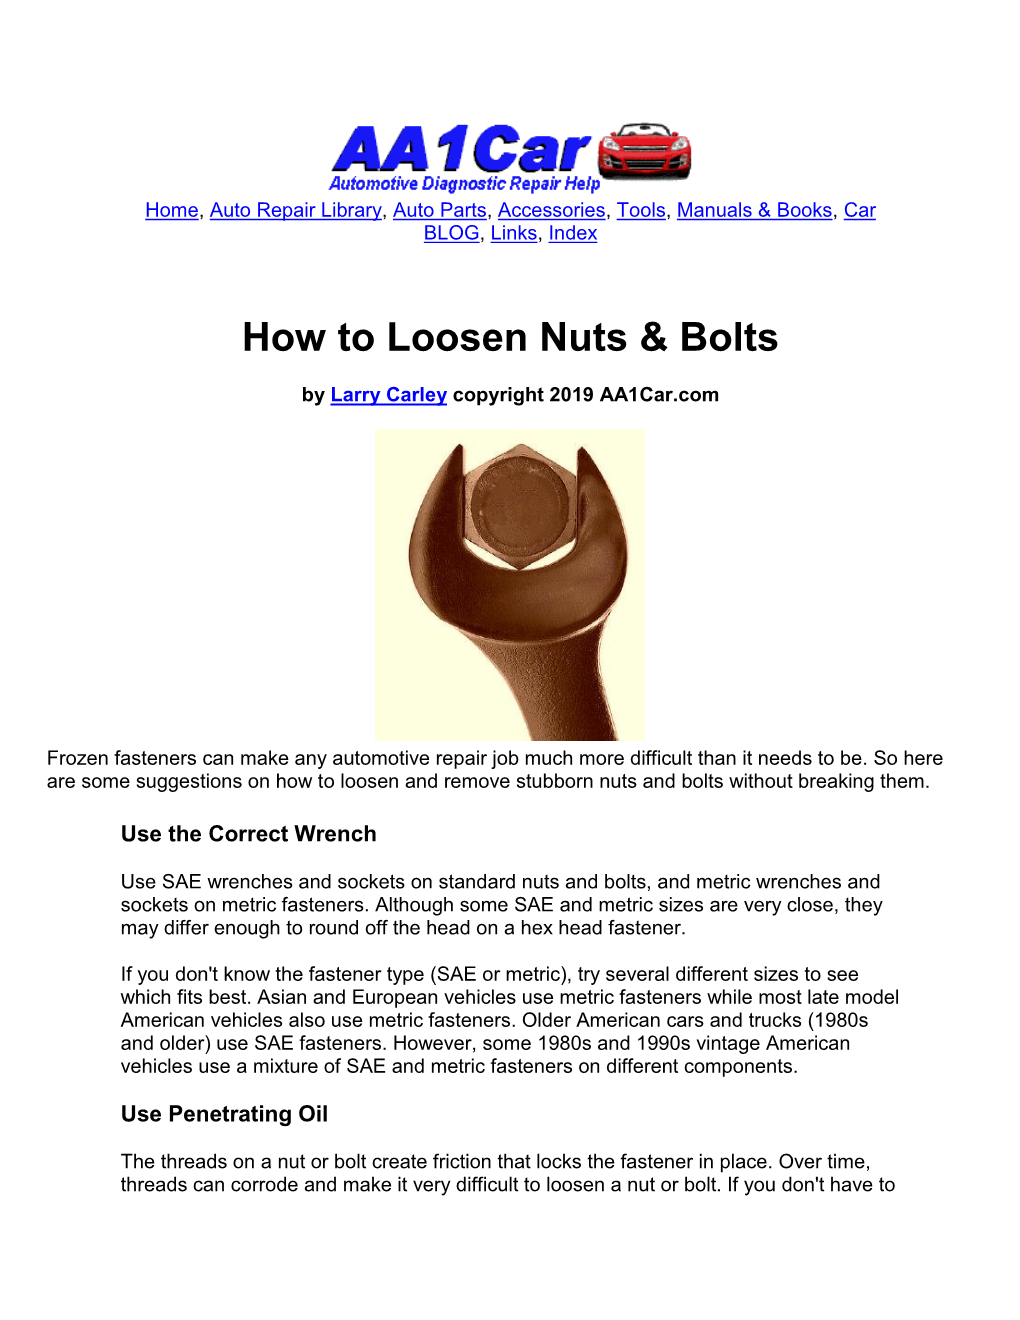 How to Loosen Nuts & Bolts